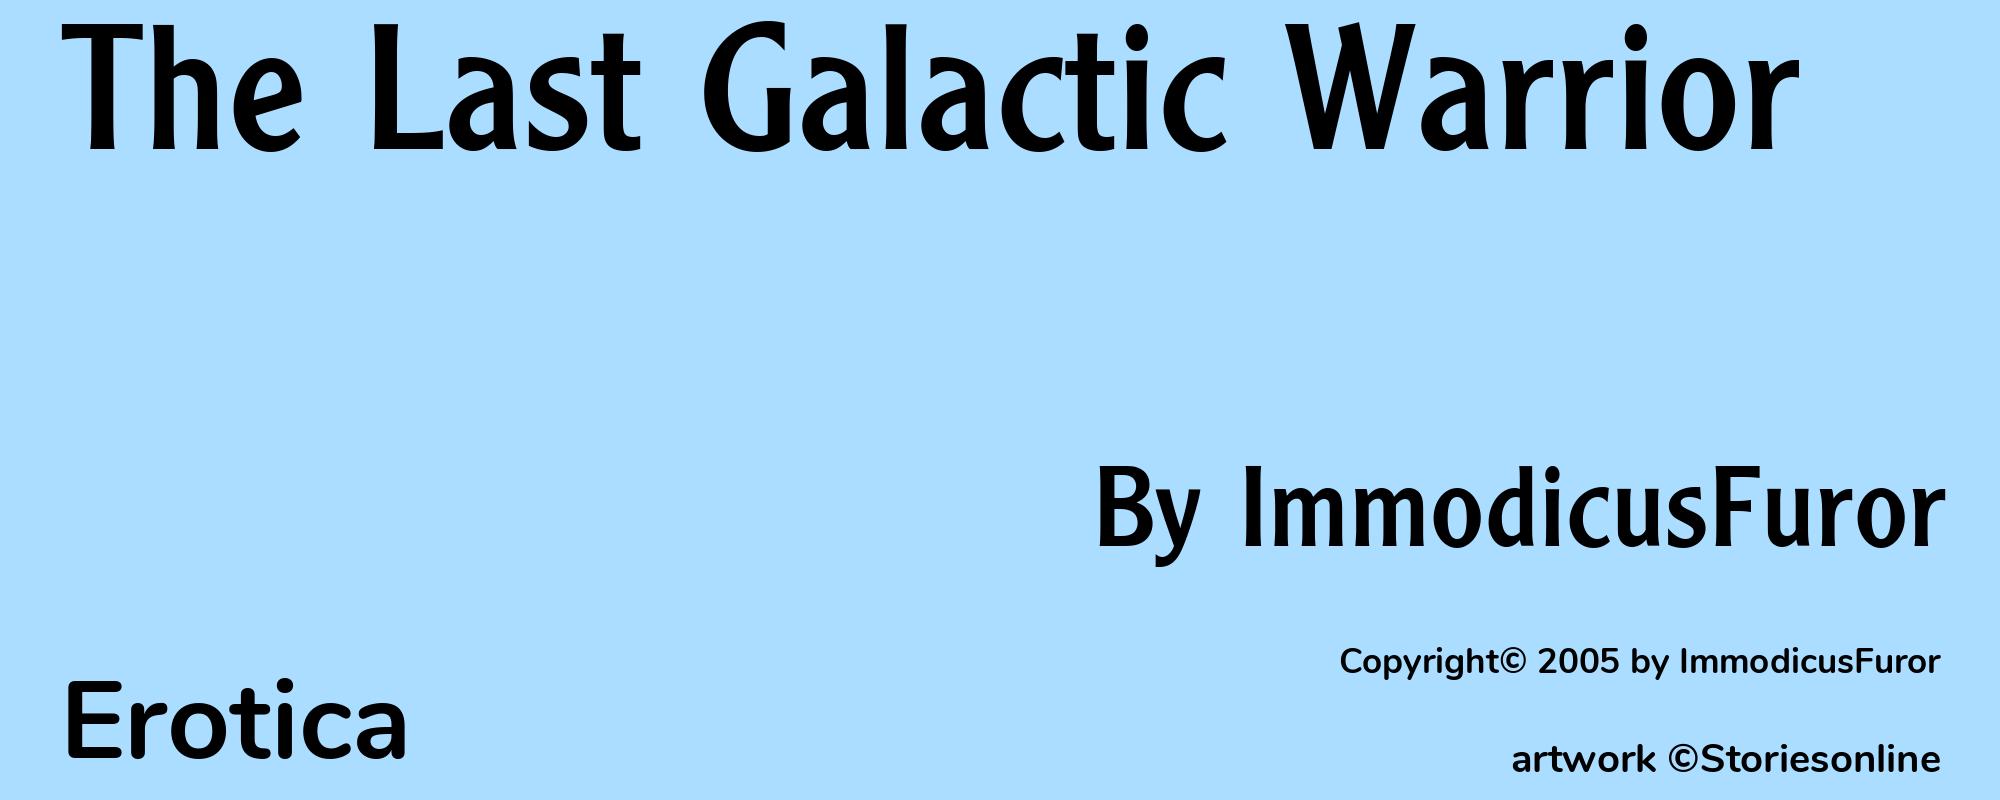 The Last Galactic Warrior - Cover